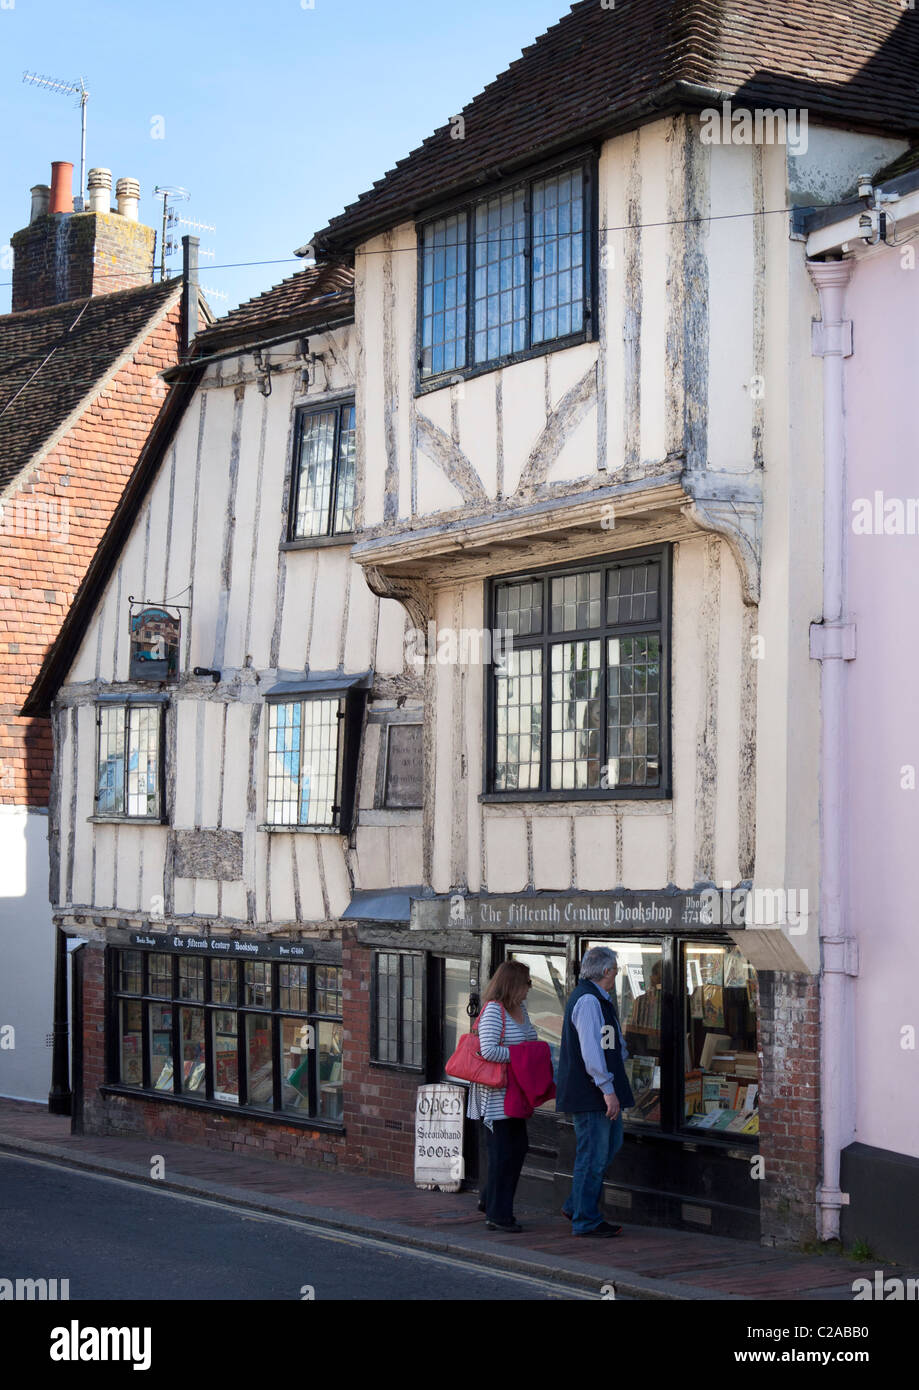 The fifteenth century bookshop in Lewes East Sussex Stock Photo